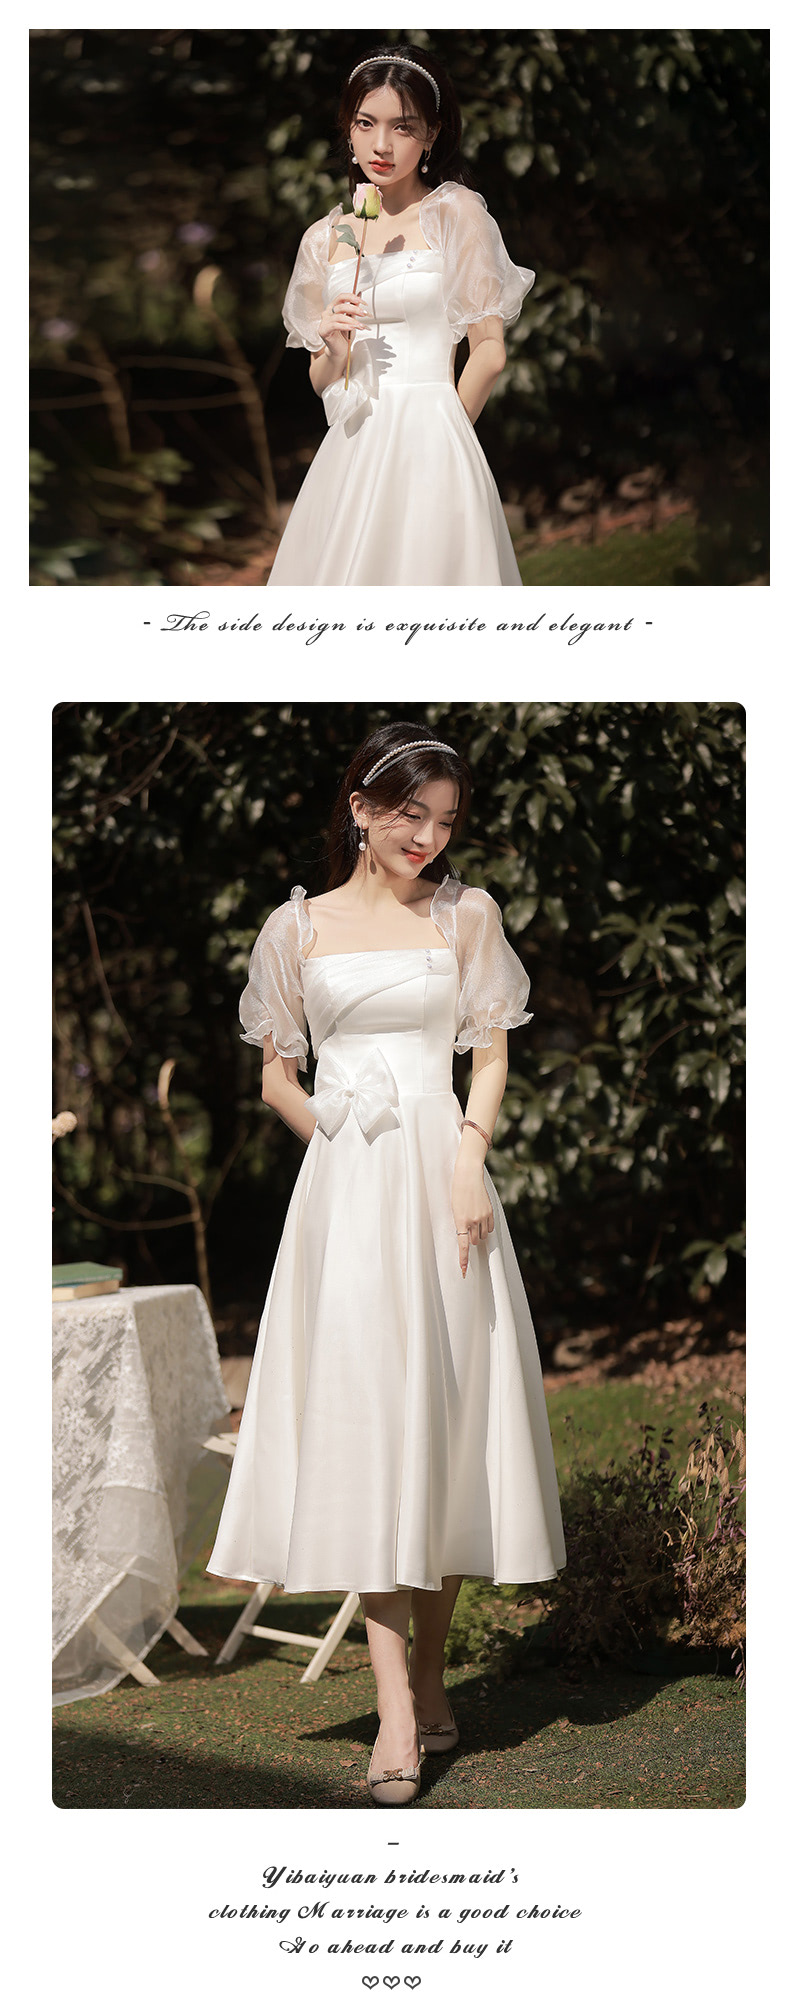 Sweet-White-Bridesmaid-Dress-Plus-Size-with-4-Different-Styles24.jpg